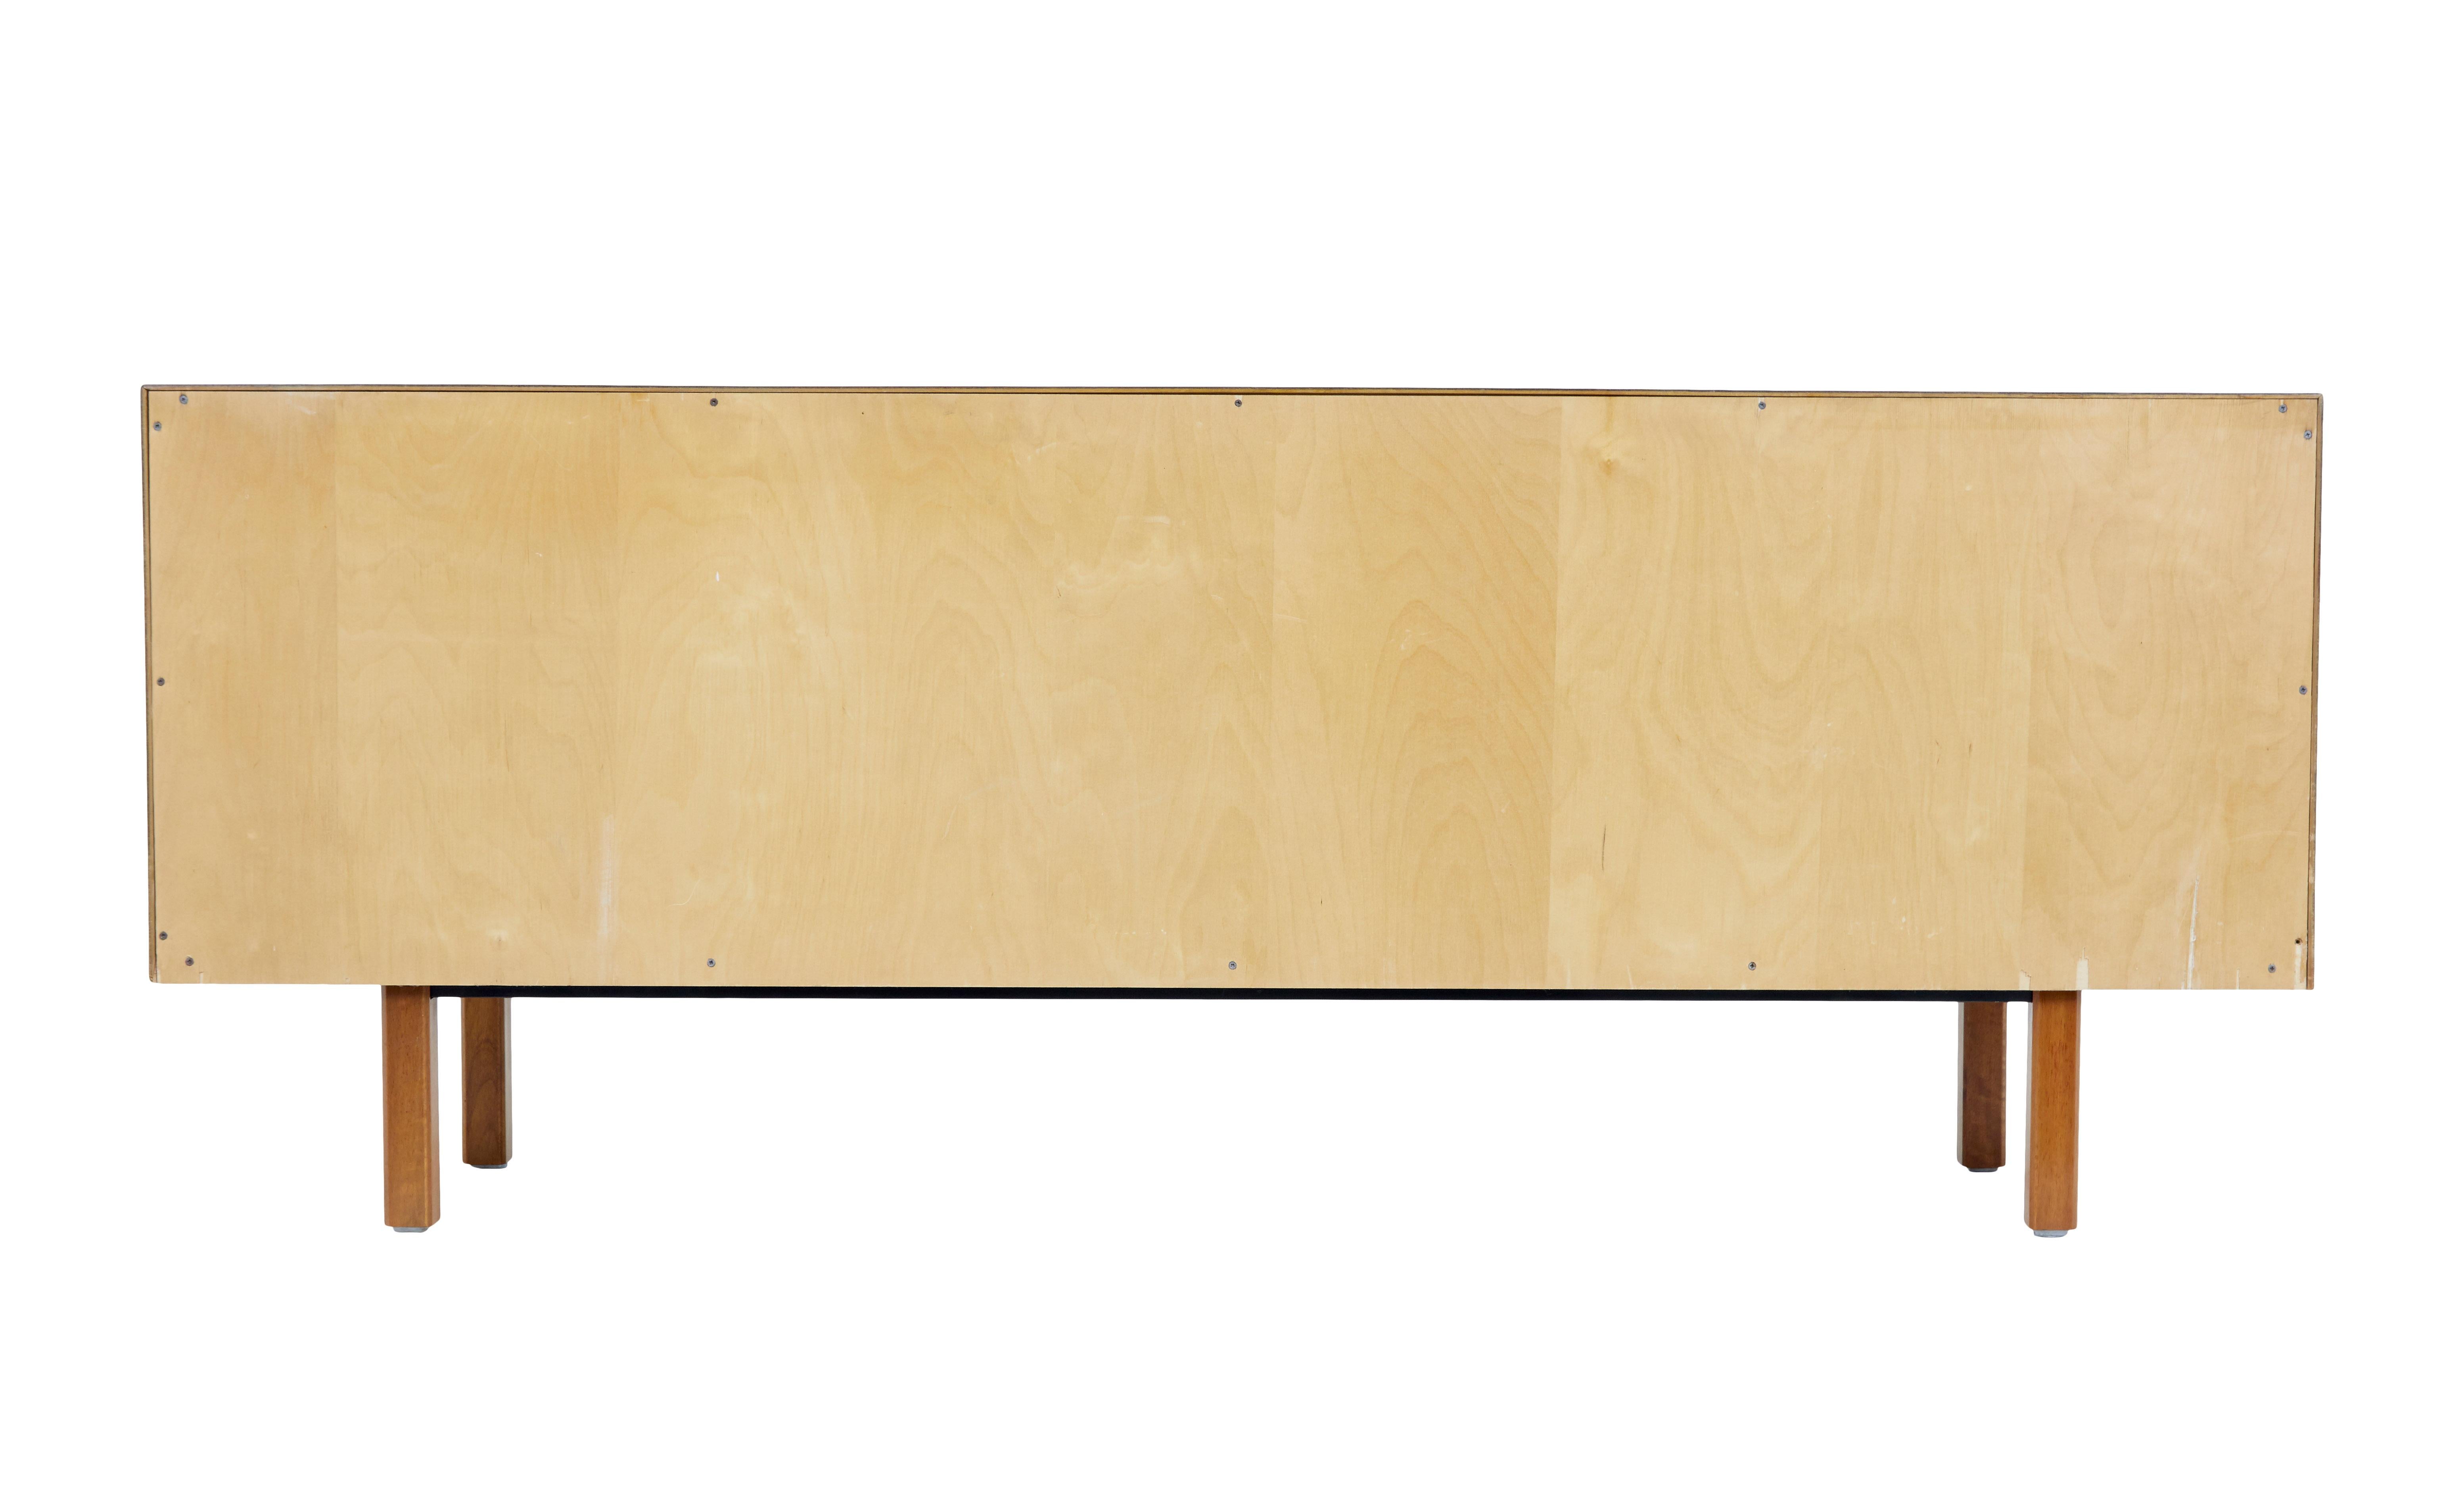 Teak 20th century Swedish teak tambour front sideboard by Atvidabergs For Sale